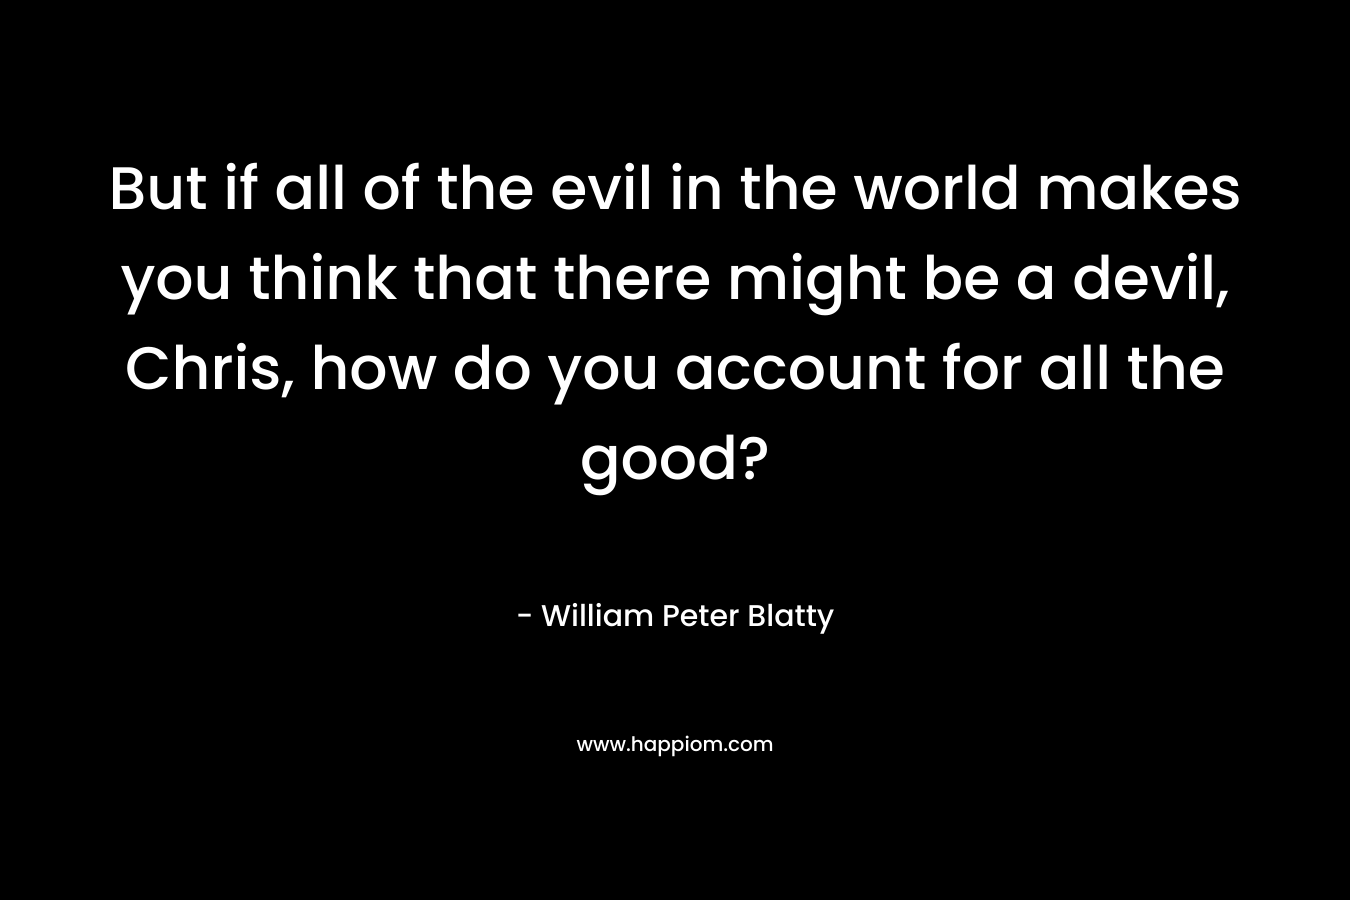 But if all of the evil in the world makes you think that there might be a devil, Chris, how do you account for all the good? – William Peter Blatty